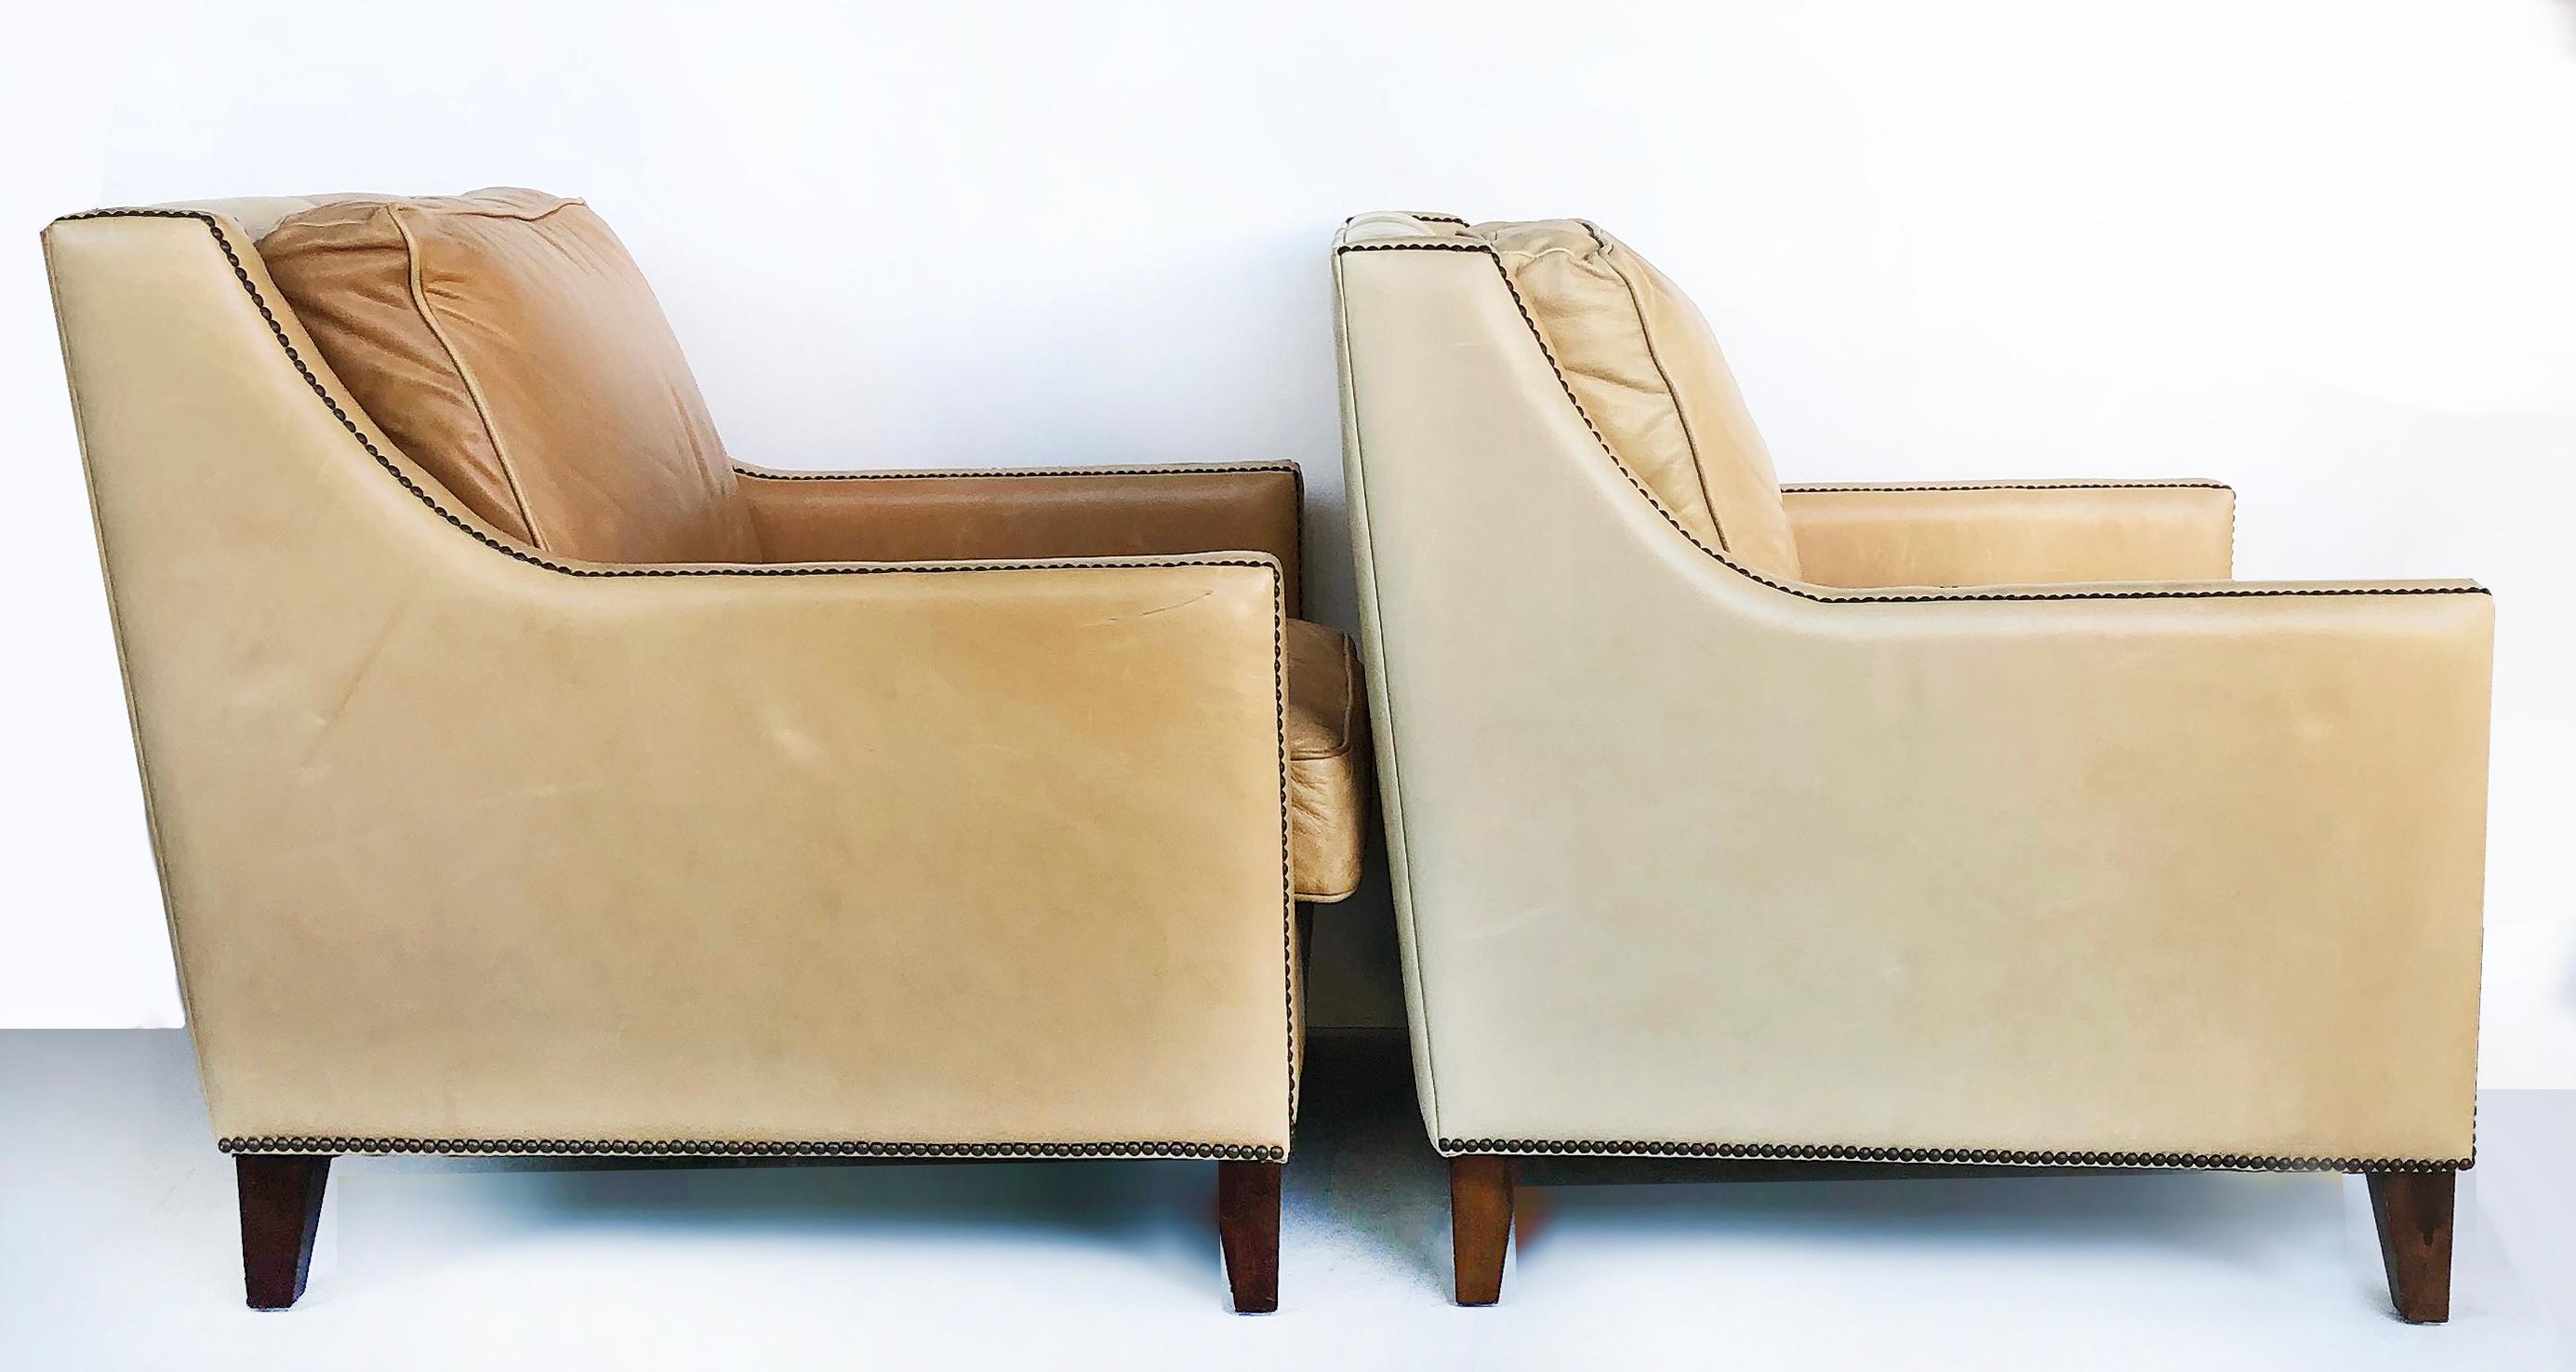 Bloomingdale's Elite leather club chairs, brass nailheads, a pair

Offered is a pair of vintage Bloomingdale's Elite Furniture leather club chairs in pale salmon tones. The tailored club chairs are finished with brass nailhead details and supported